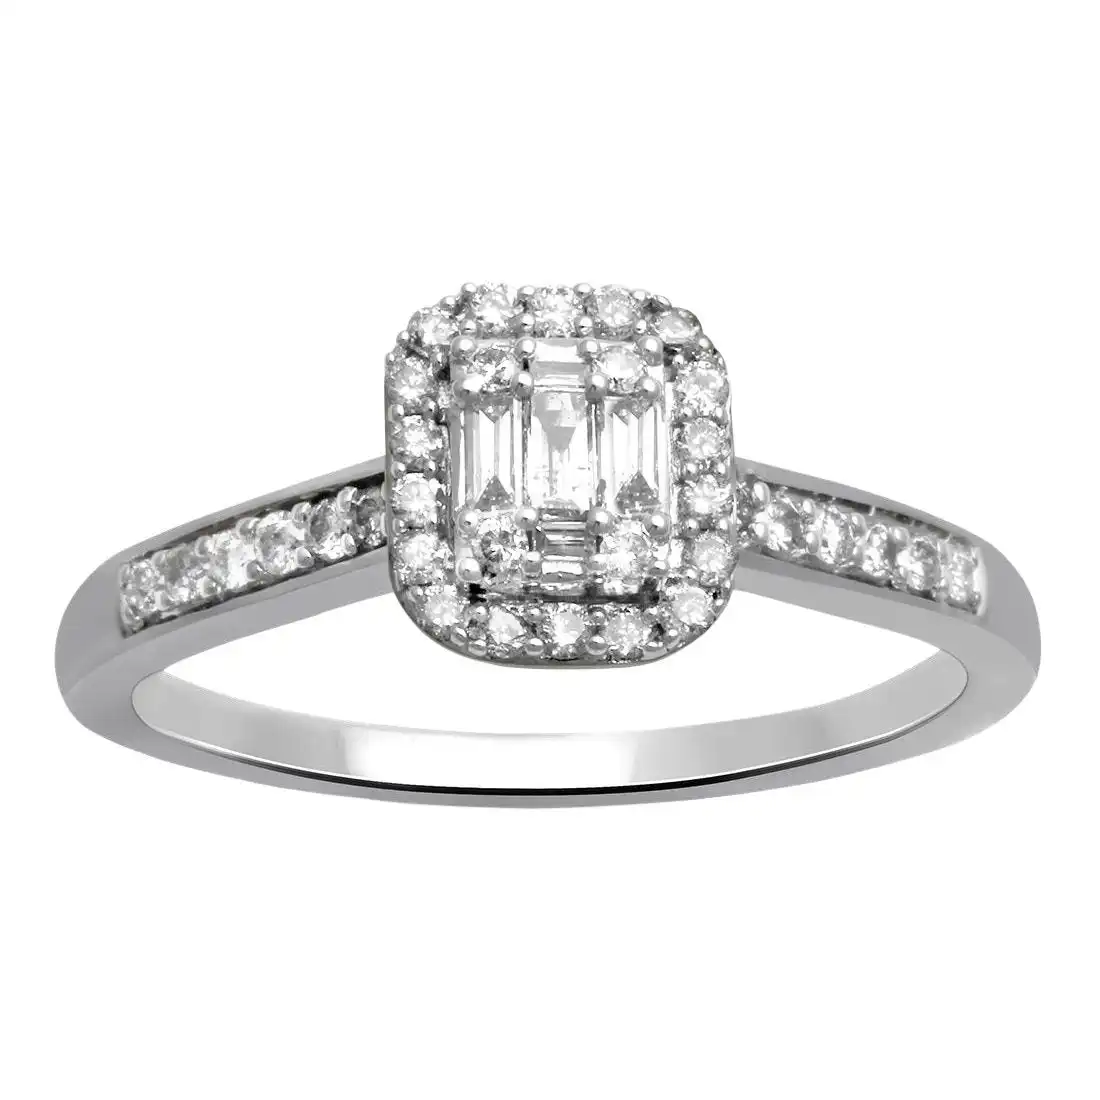 Brilliant Baguette Ring with 1/2ct of Diamonds in 9ct White Gold